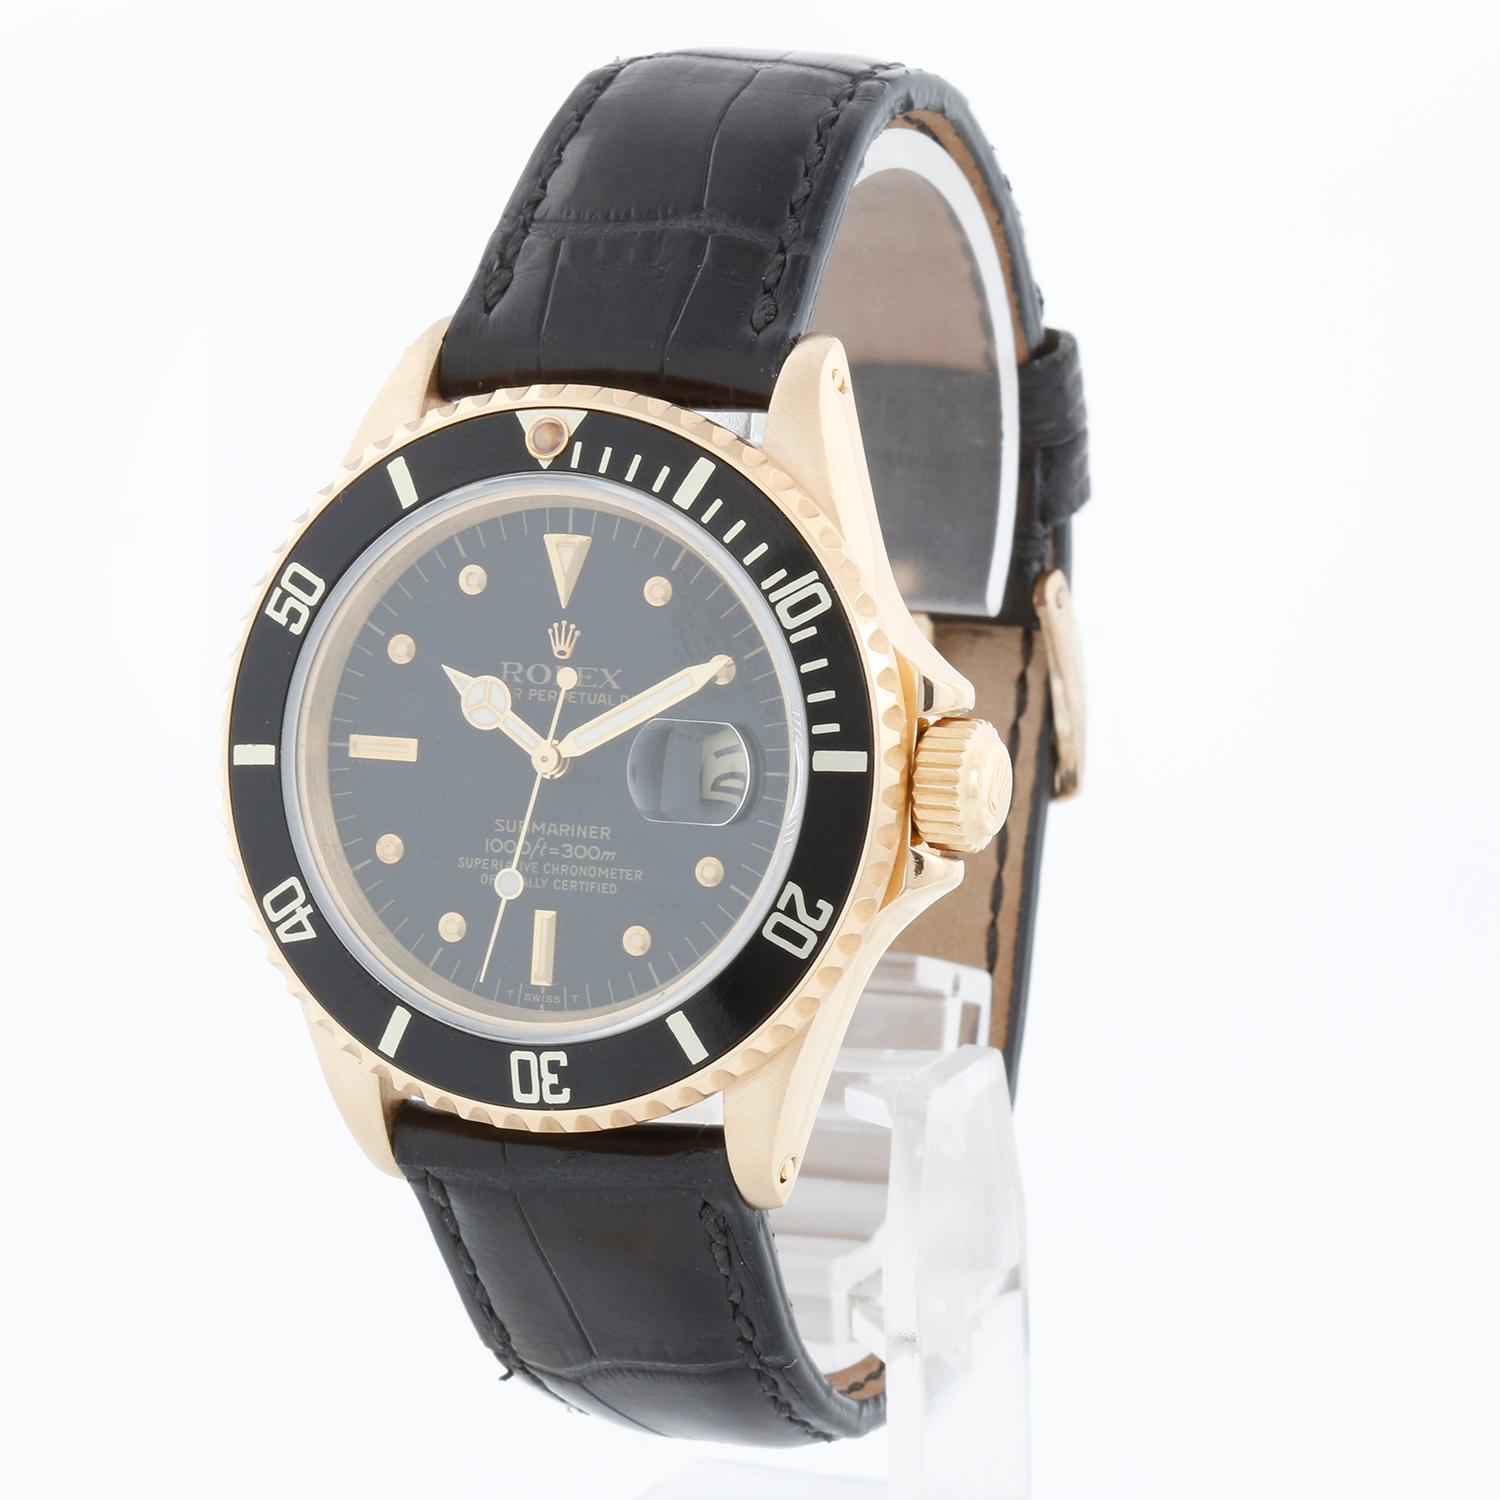 Rolex Submariner 16808 Automatic Mens Watch - Automatic. 18K Yellow gold case with black insert ( 40 mm ). Black dial. Rolex black leather strap with Rolex tang buckle. Pre-owned with custom box.